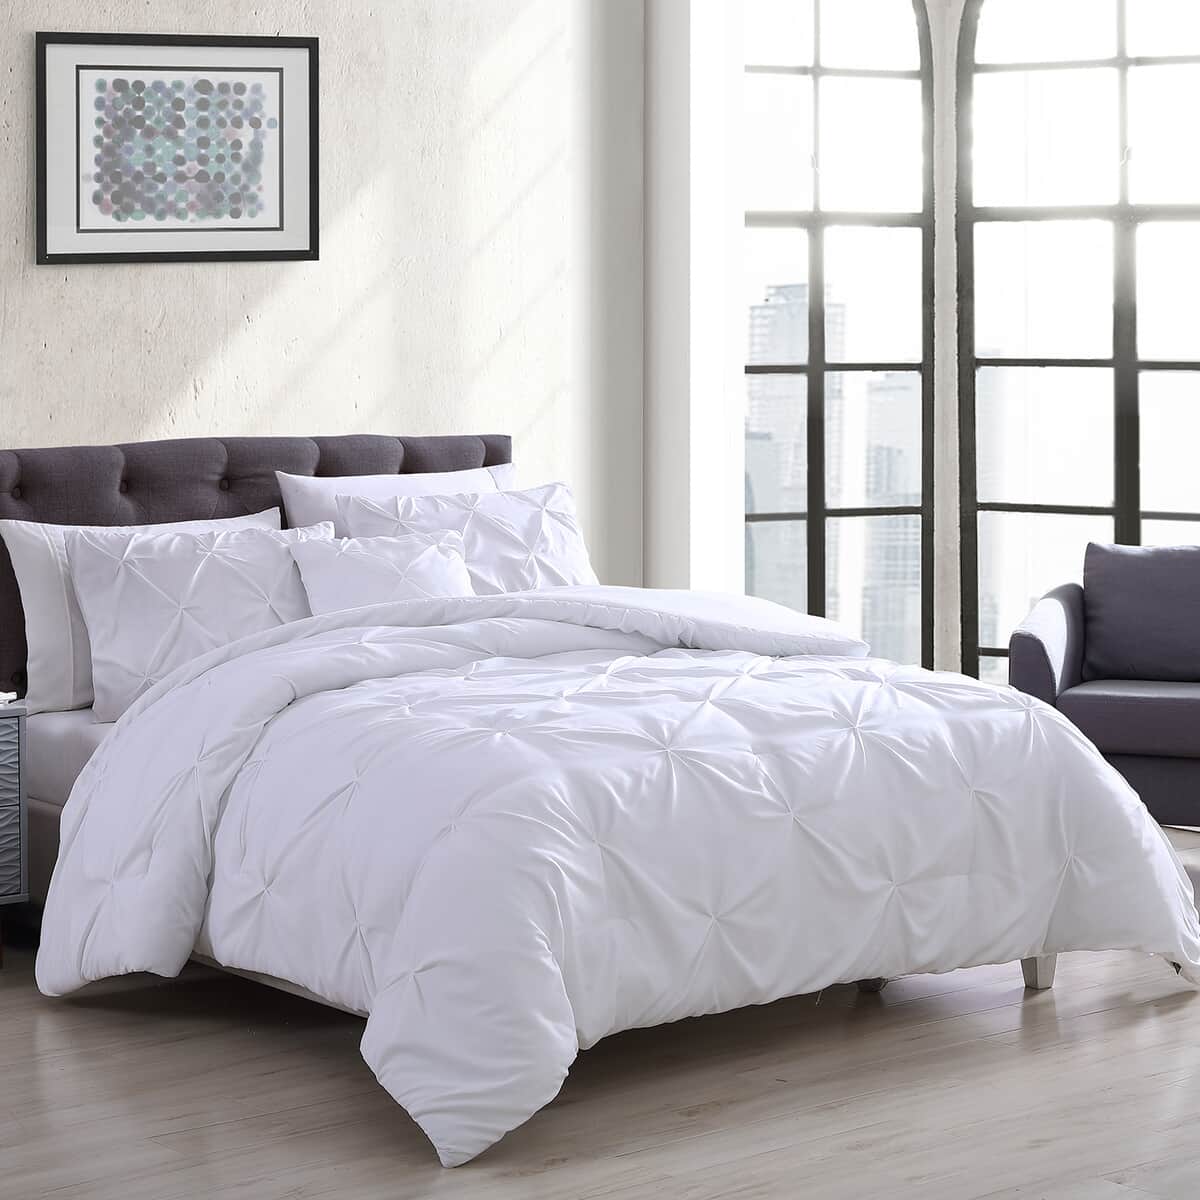 The Nesting Company- Spruce 4 Piece Comforter Set Queen White image number 0